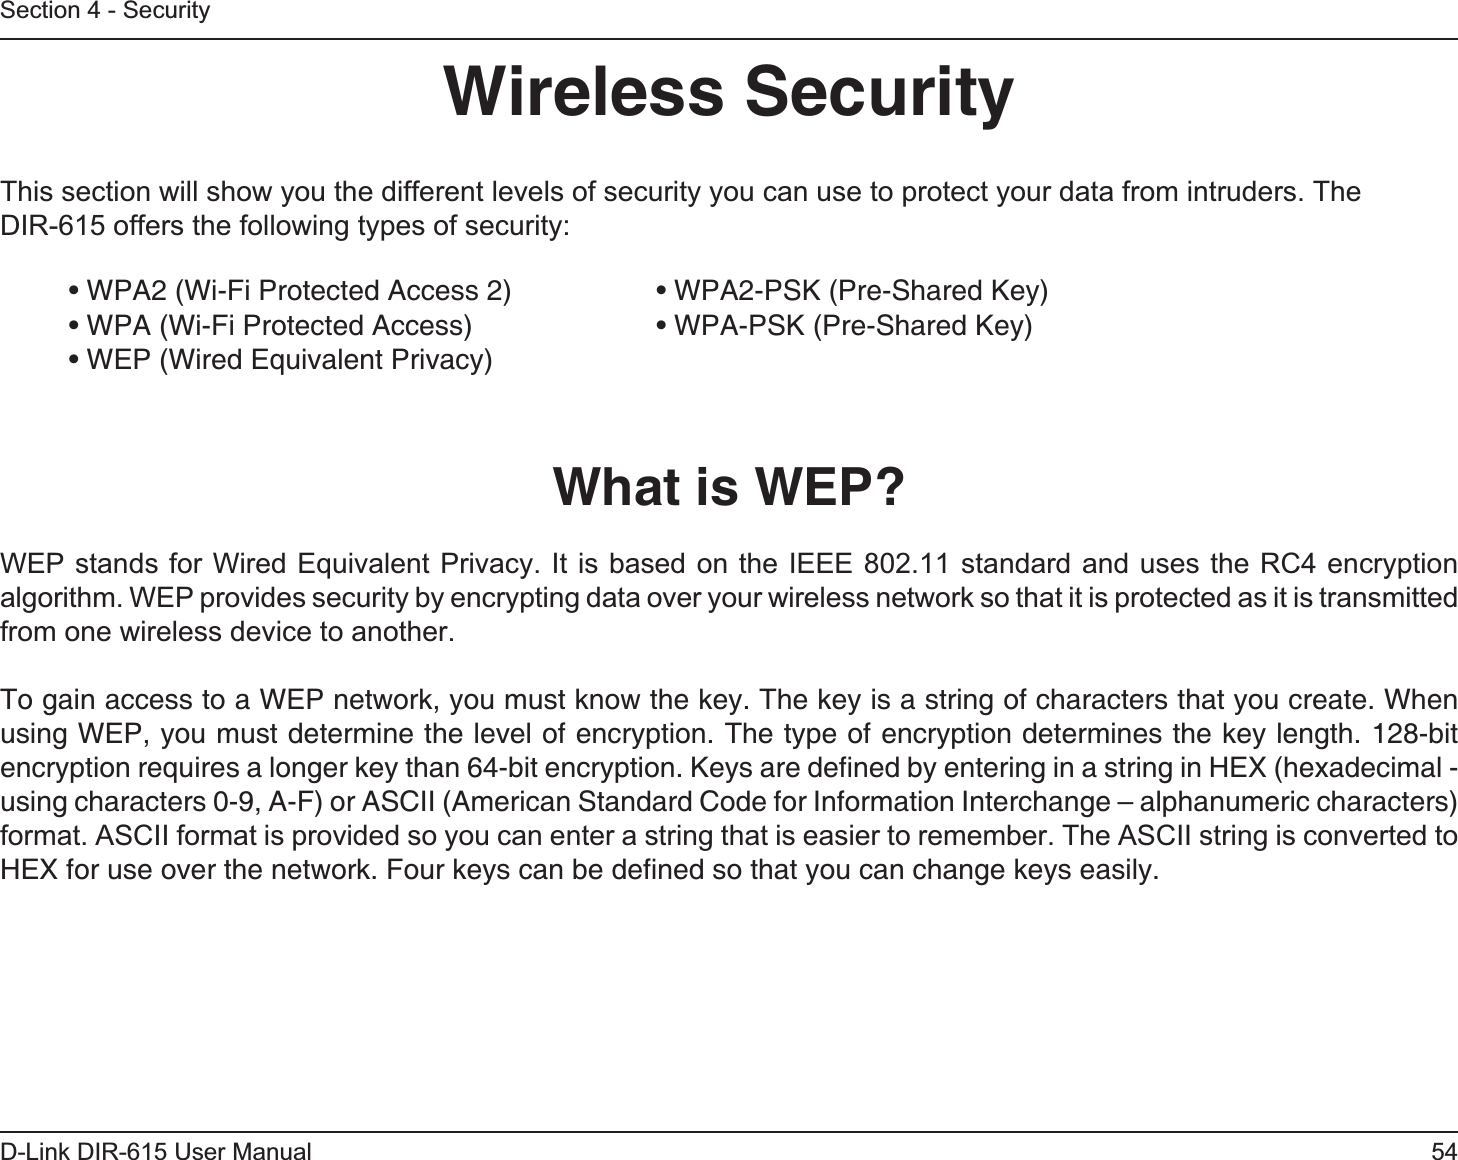 54D-Link DIR-615 User ManualSection 4 - SecurityWireless SecurityThis section will show you the different levels of security you can use to protect your data from intruders. The DIR-615 offers the following types of security:• WPA2 (Wi-Fi Protected Access 2)     • WPA2-PSK (Pre-Shared Key)• WPA (Wi-Fi Protected Access)      • WPA-PSK (Pre-Shared Key)• WEP (Wired Equivalent Privacy)What is WEP?WEP stands for Wired Equivalent Privacy. It is based on the IEEE 802.11 standard and uses the RC4 encryption algorithm. WEP provides security by encrypting data over your wireless network so that it is protected as it is transmitted from one wireless device to another.To gain access to a WEP network, you must know the key. The key is a string of characters that you create. When using WEP, you must determine the level of encryption. The type of encryption determines the key length. 128-bit encryption requires a longer key than 64-bit encryption. Keys are deﬁned by entering in a string in HEX (hexadecimal - using characters 0-9, A-F) or ASCII (American Standard Code for Information Interchange – alphanumeric characters) format. ASCII format is provided so you can enter a string that is easier to remember. The ASCII string is converted to HEX for use over the network. Four keys can be deﬁned so that you can change keys easily.